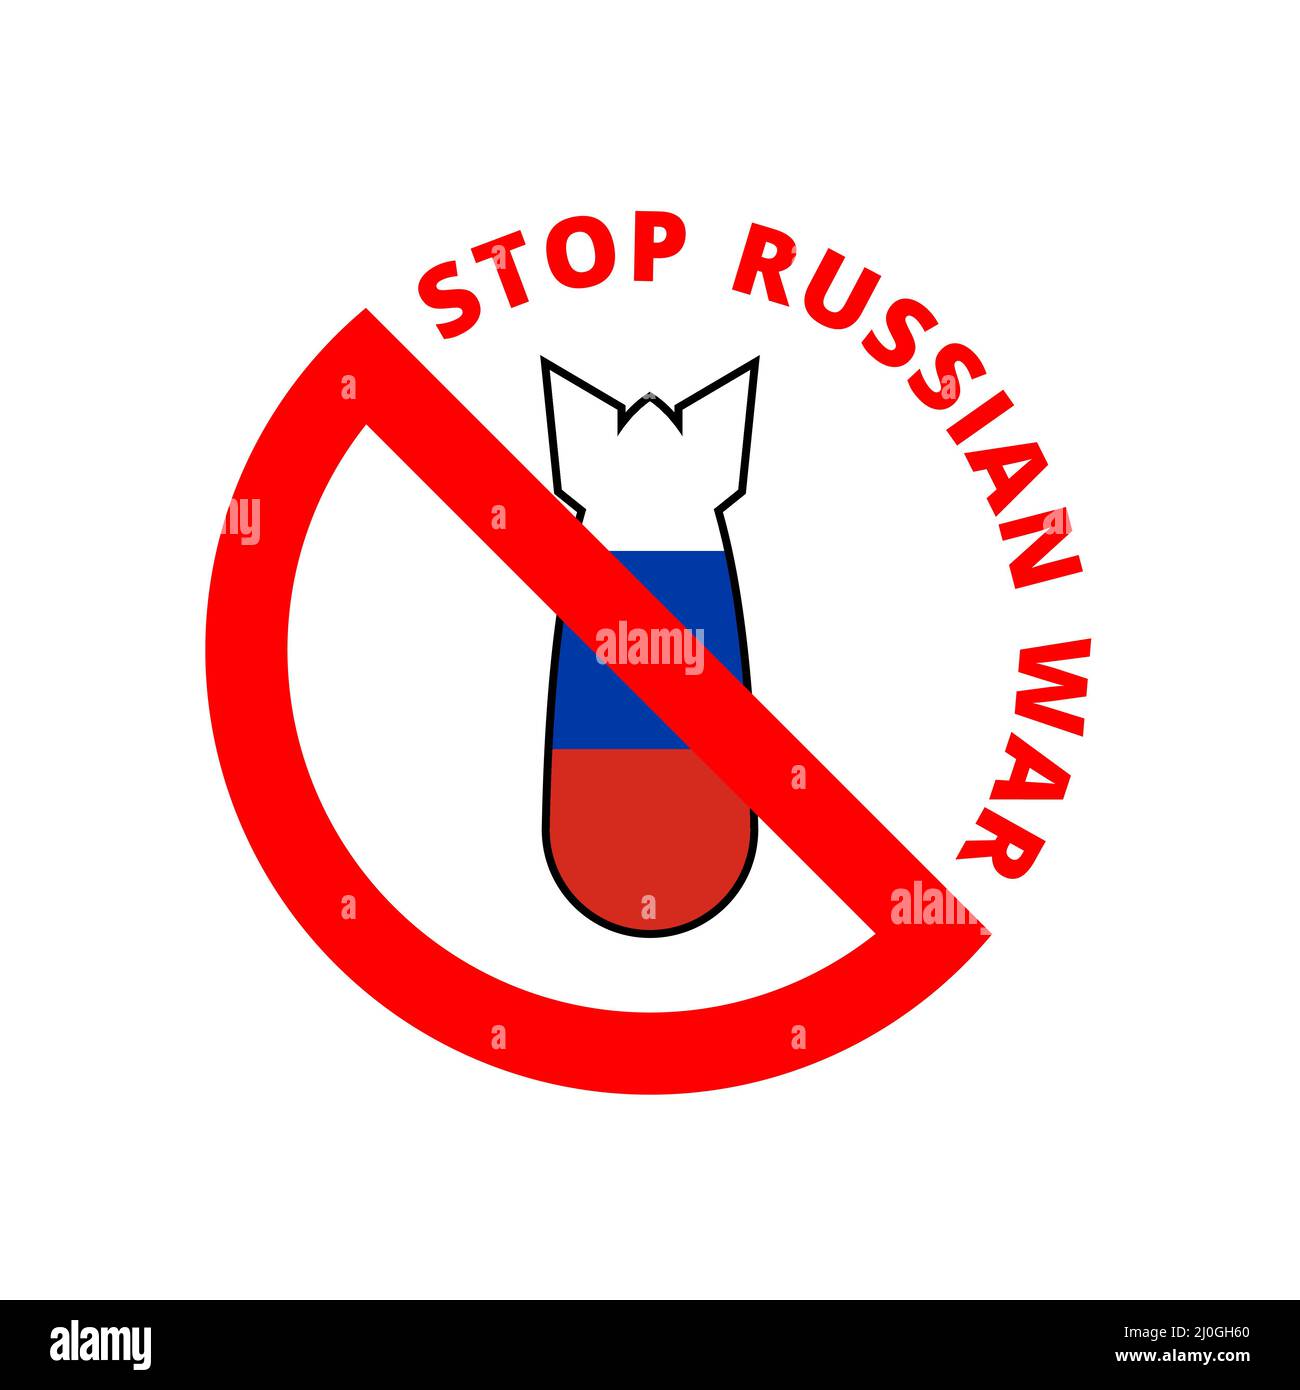 File:Unofficial flag of the Russian anti-war movement with coat of arms.jpg  - Wikimedia Commons